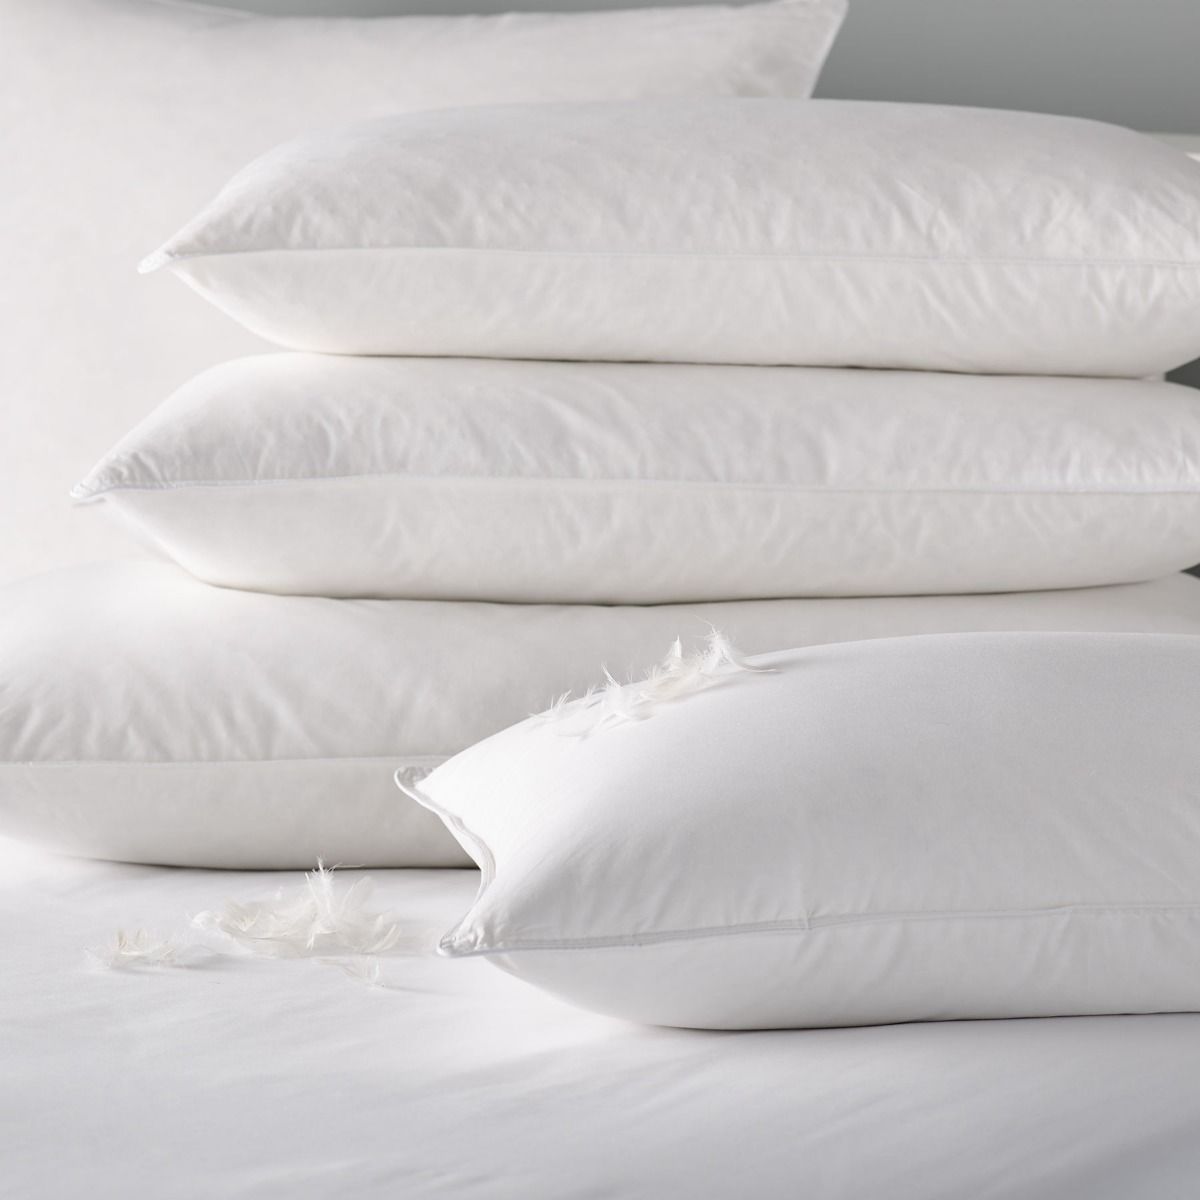 2 x PAIR OF LUXURY 100% DUCK FEATHER PILLOWS 